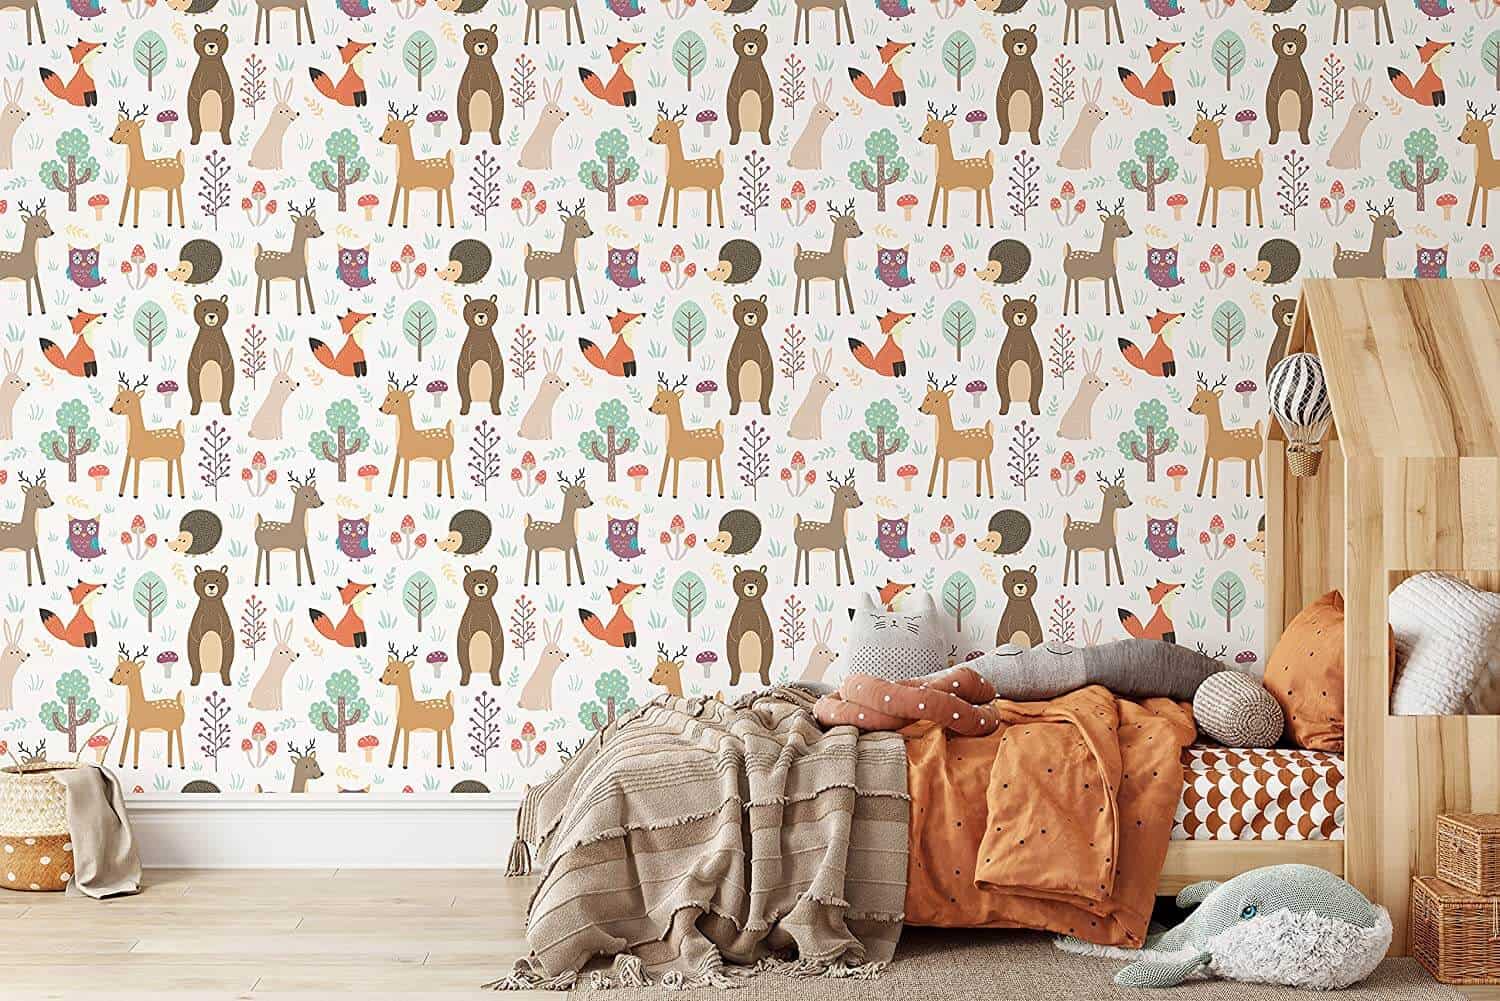 Top 10 Removable Wallpapers for the Nursery and Playroom